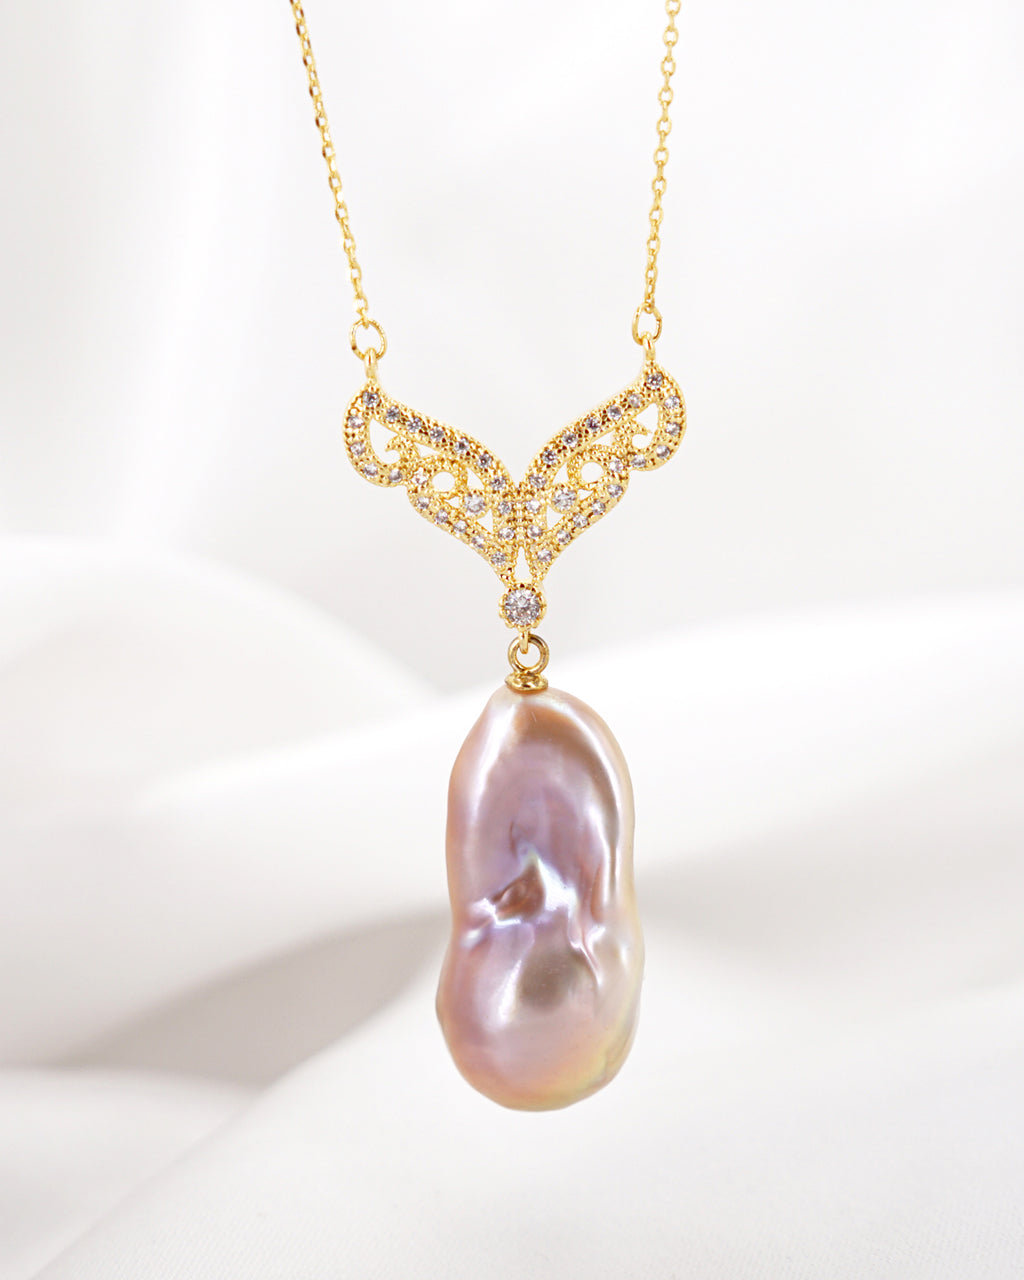 Lavender Purple Baroque Pearl Necklace - Gold - Wedding Bridal Jewelry for Brides and Bridesmaids | Singapore